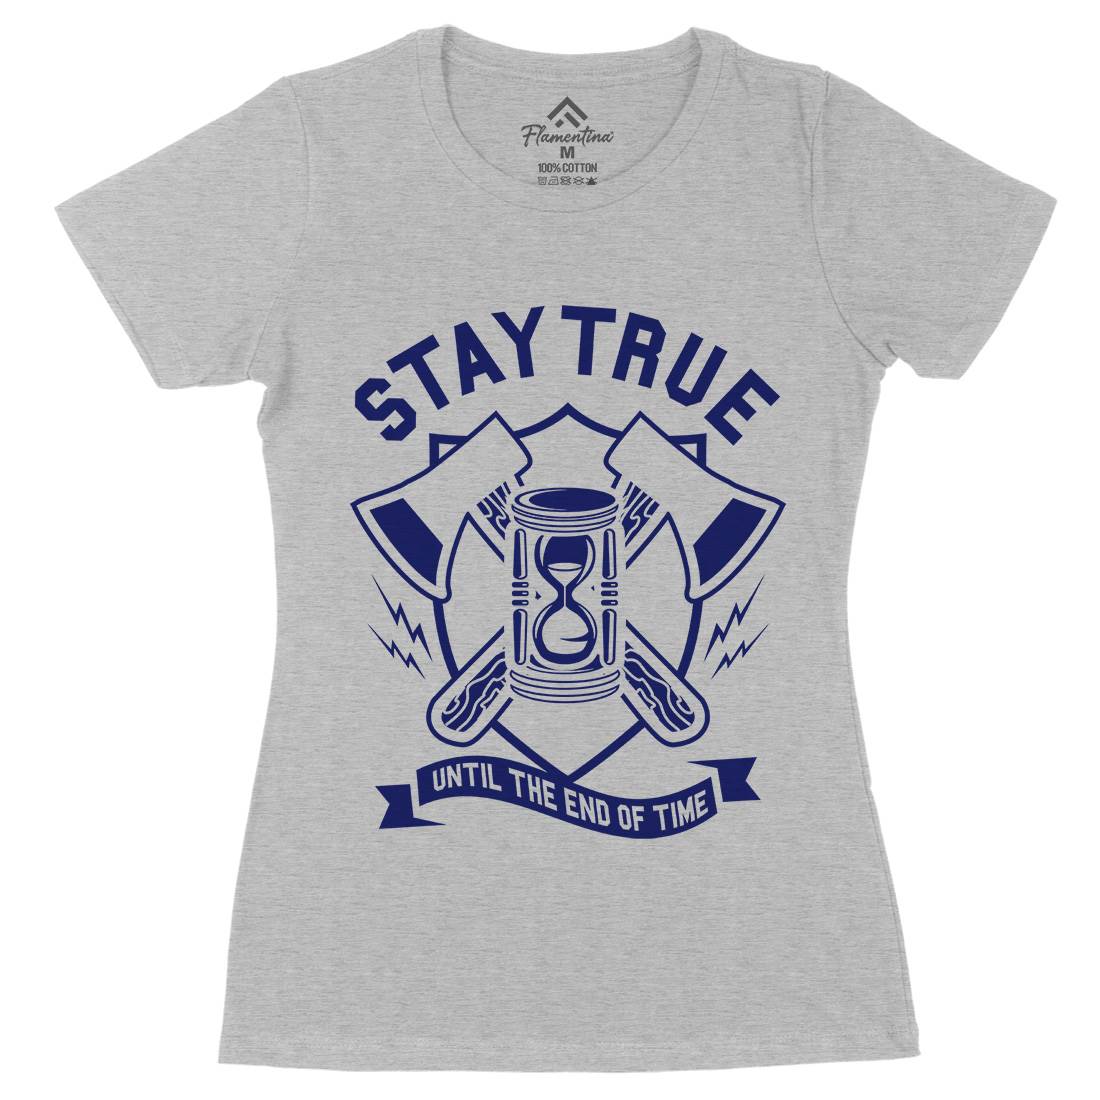 Stay True Womens Organic Crew Neck T-Shirt Quotes A285